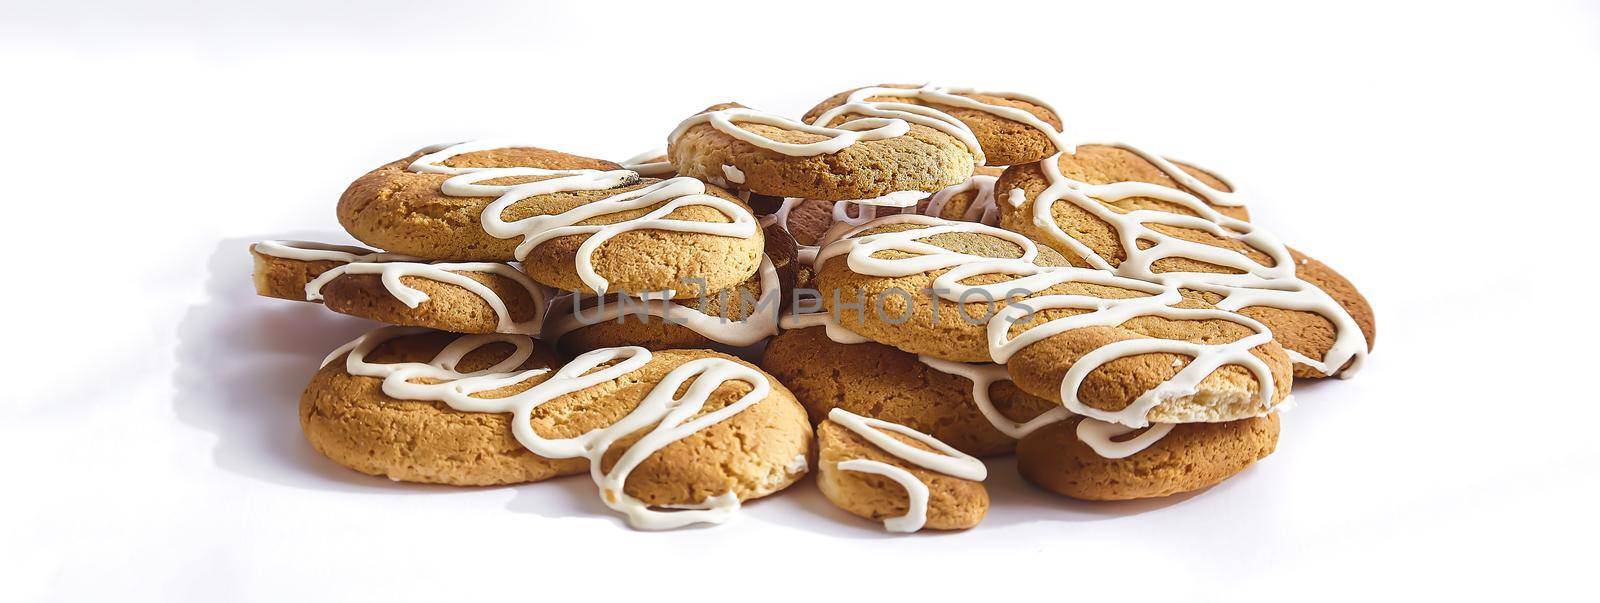 Cookies white background by pippocarlot